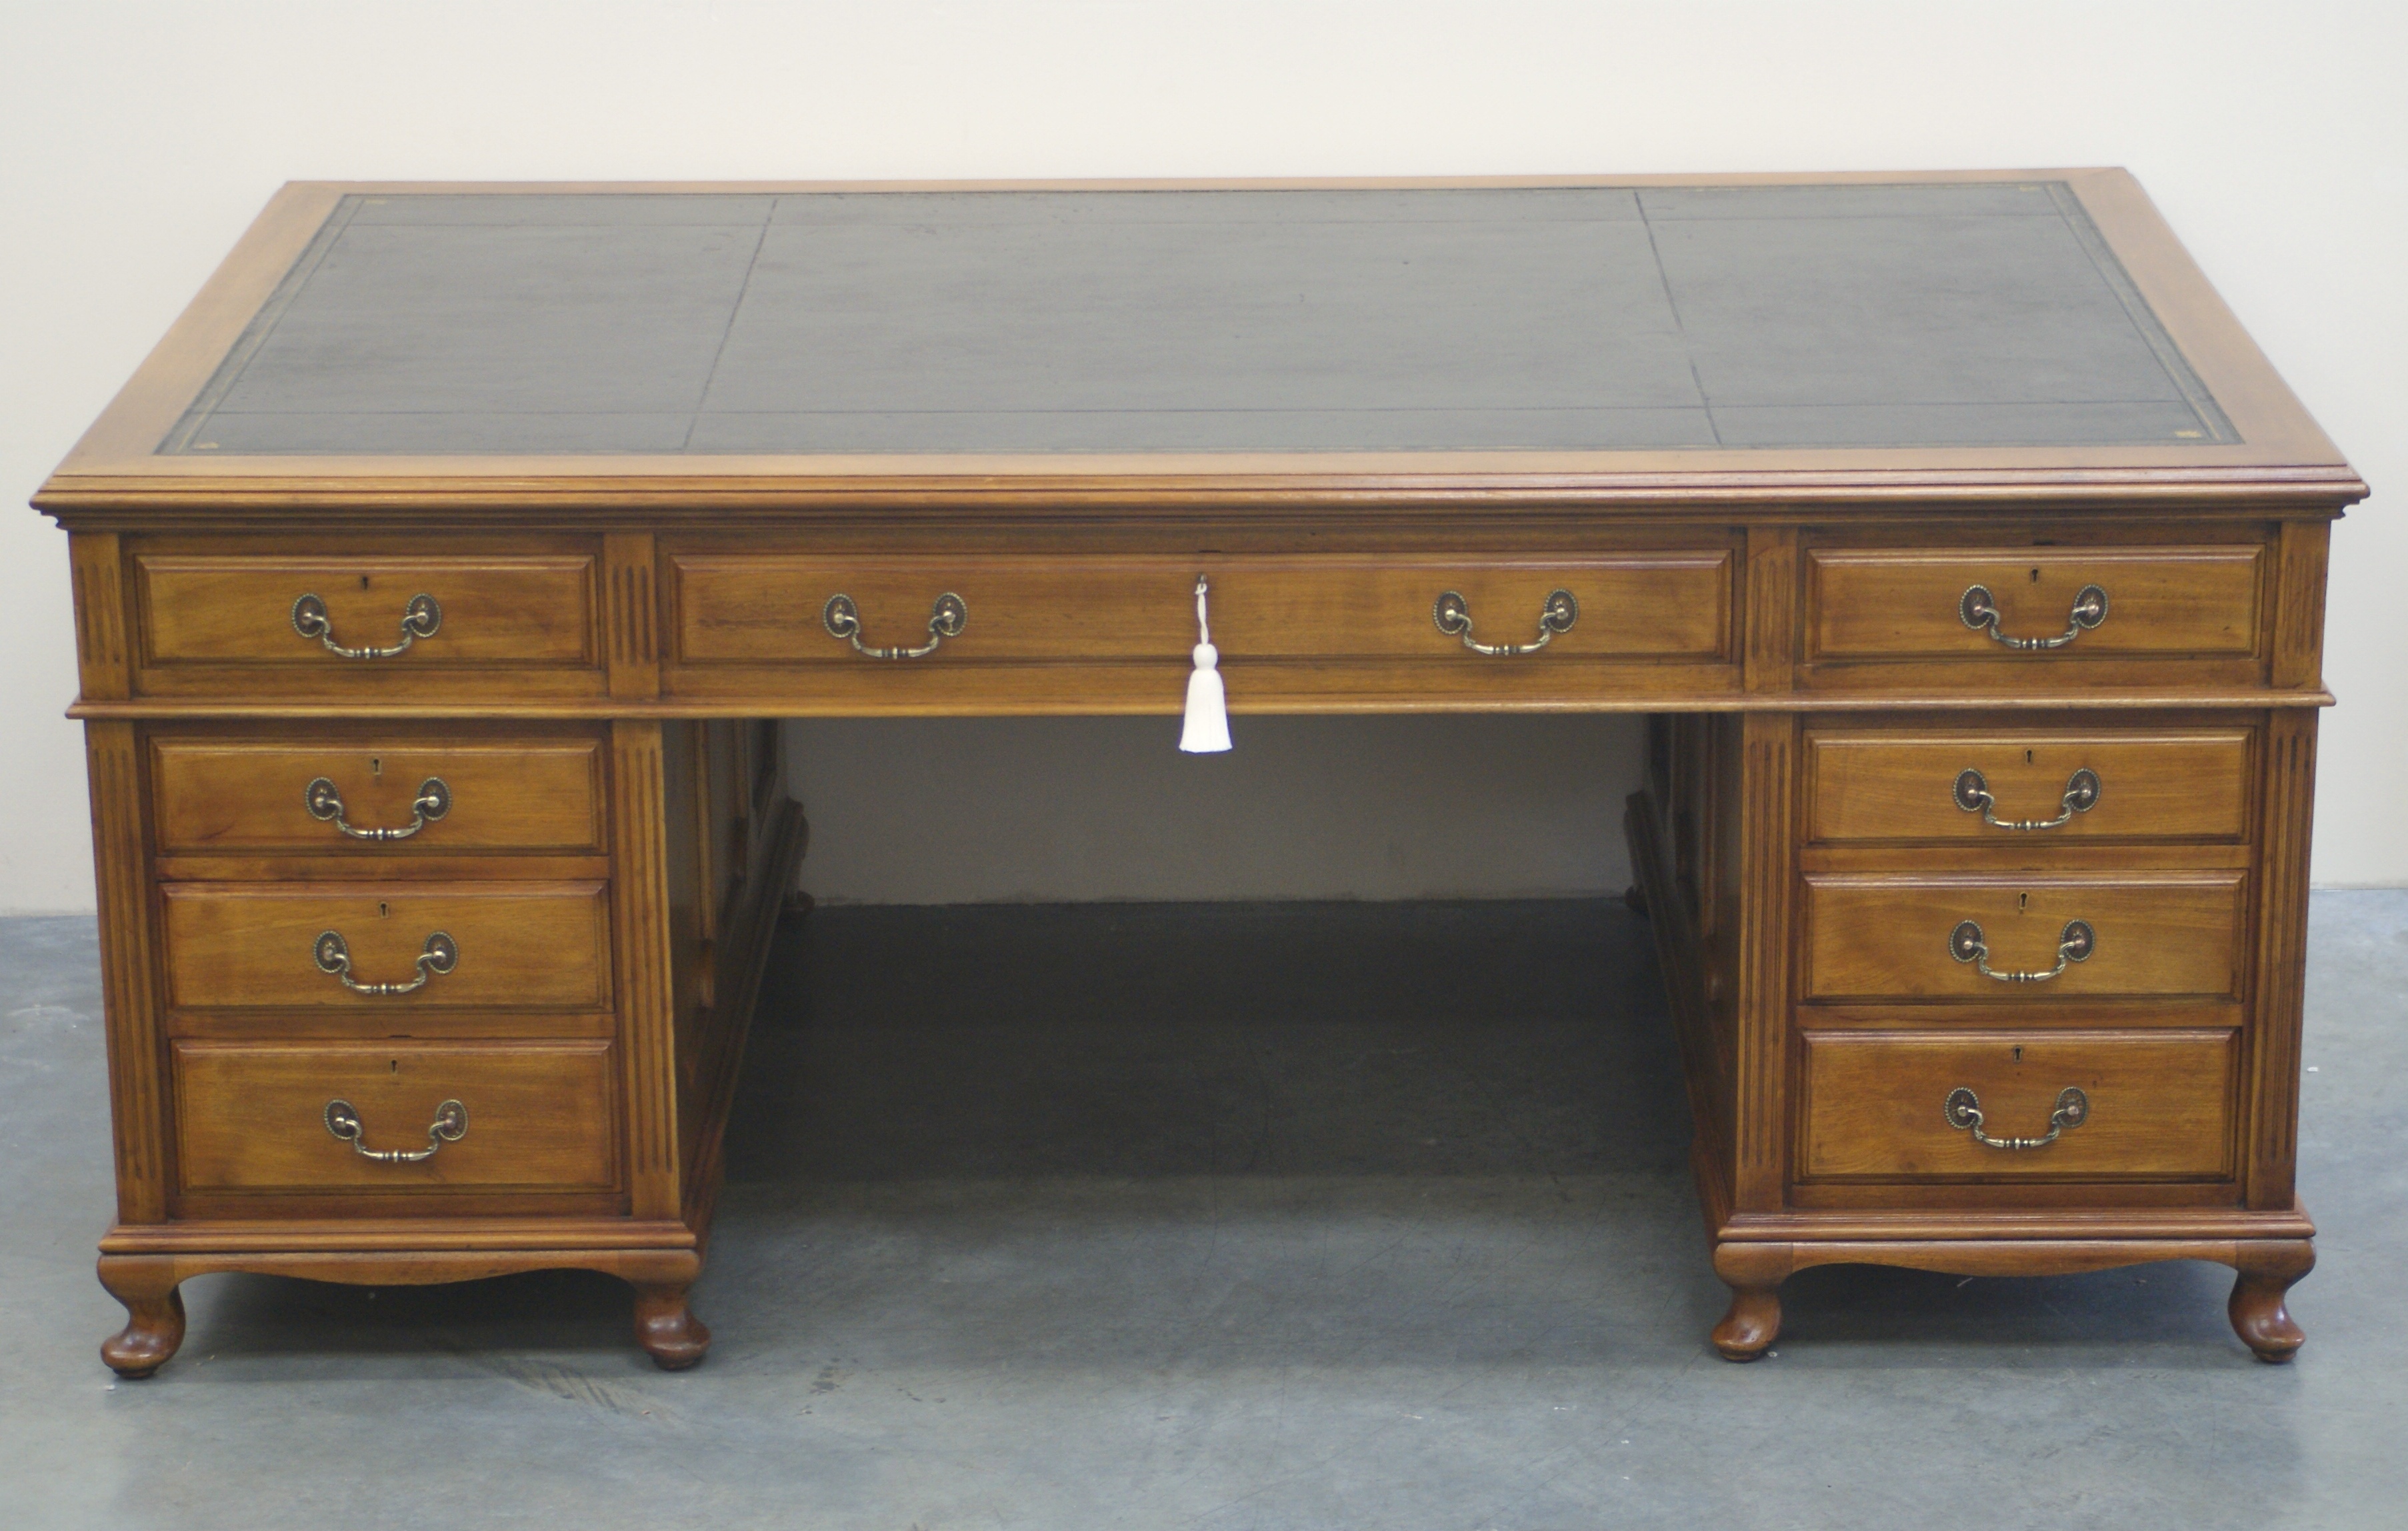 Mahogany Executive Desks Browse All Office Furniture